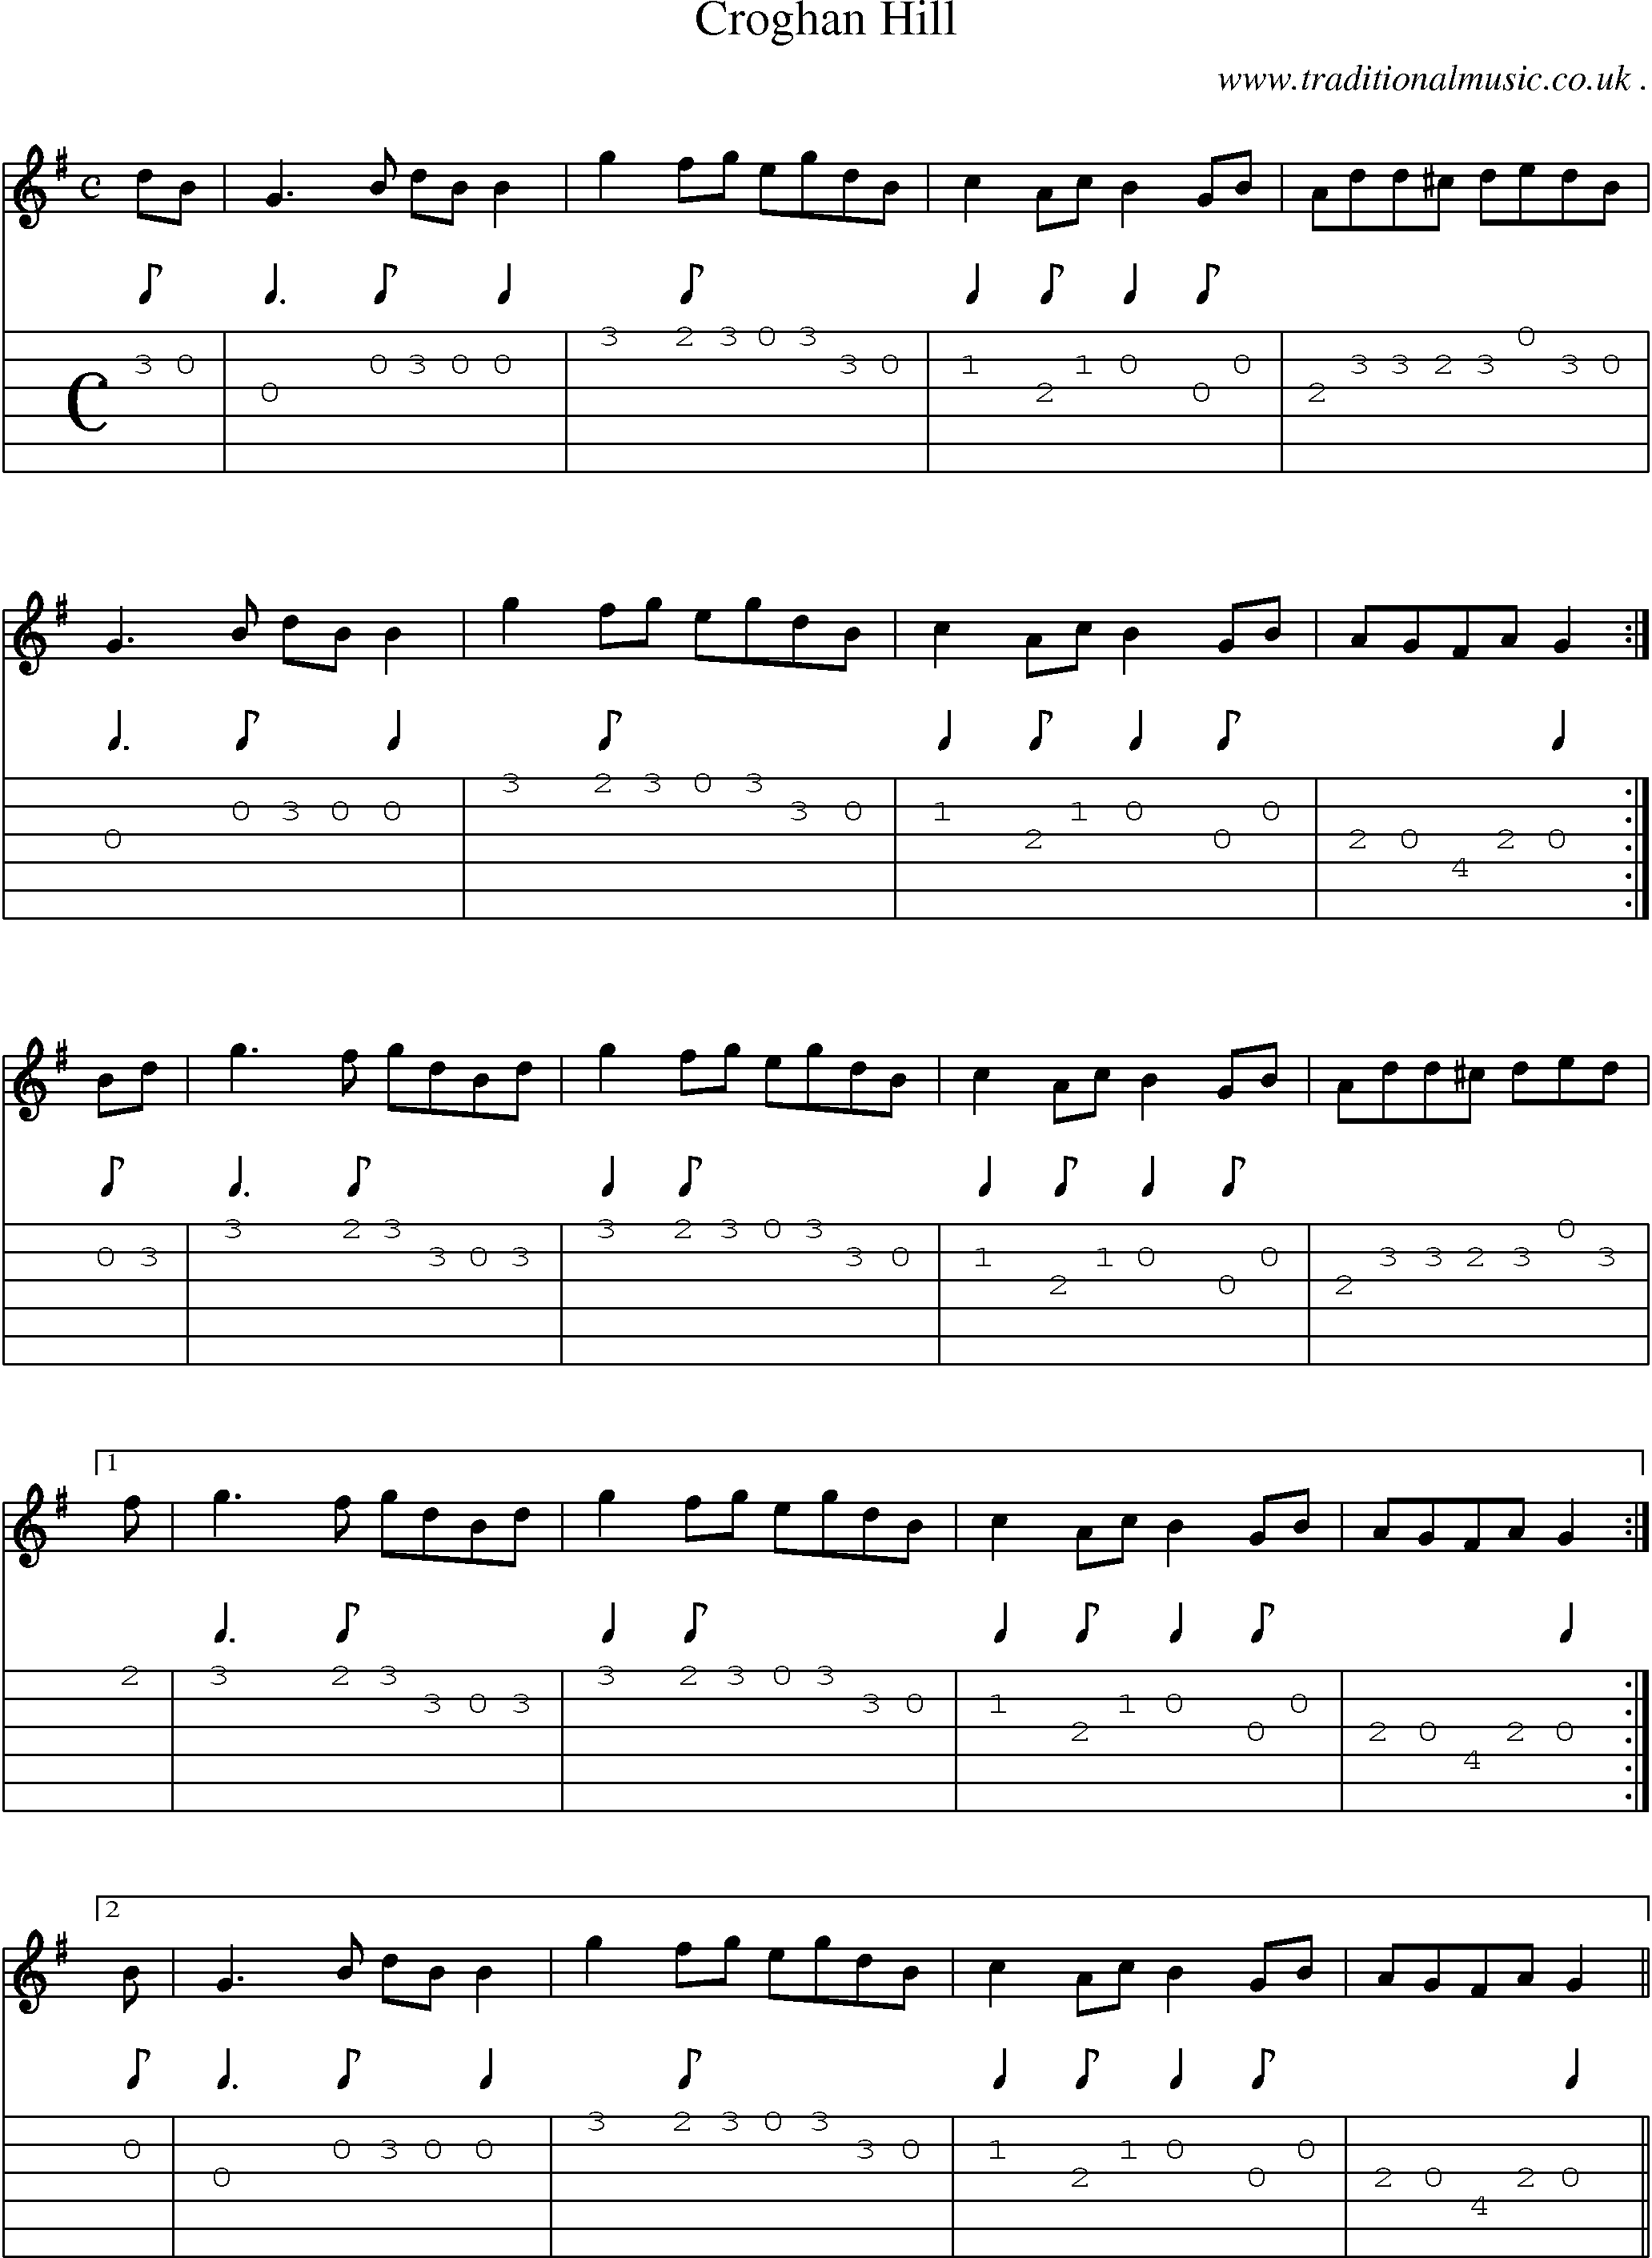 Sheet-Music and Guitar Tabs for Croghan Hill